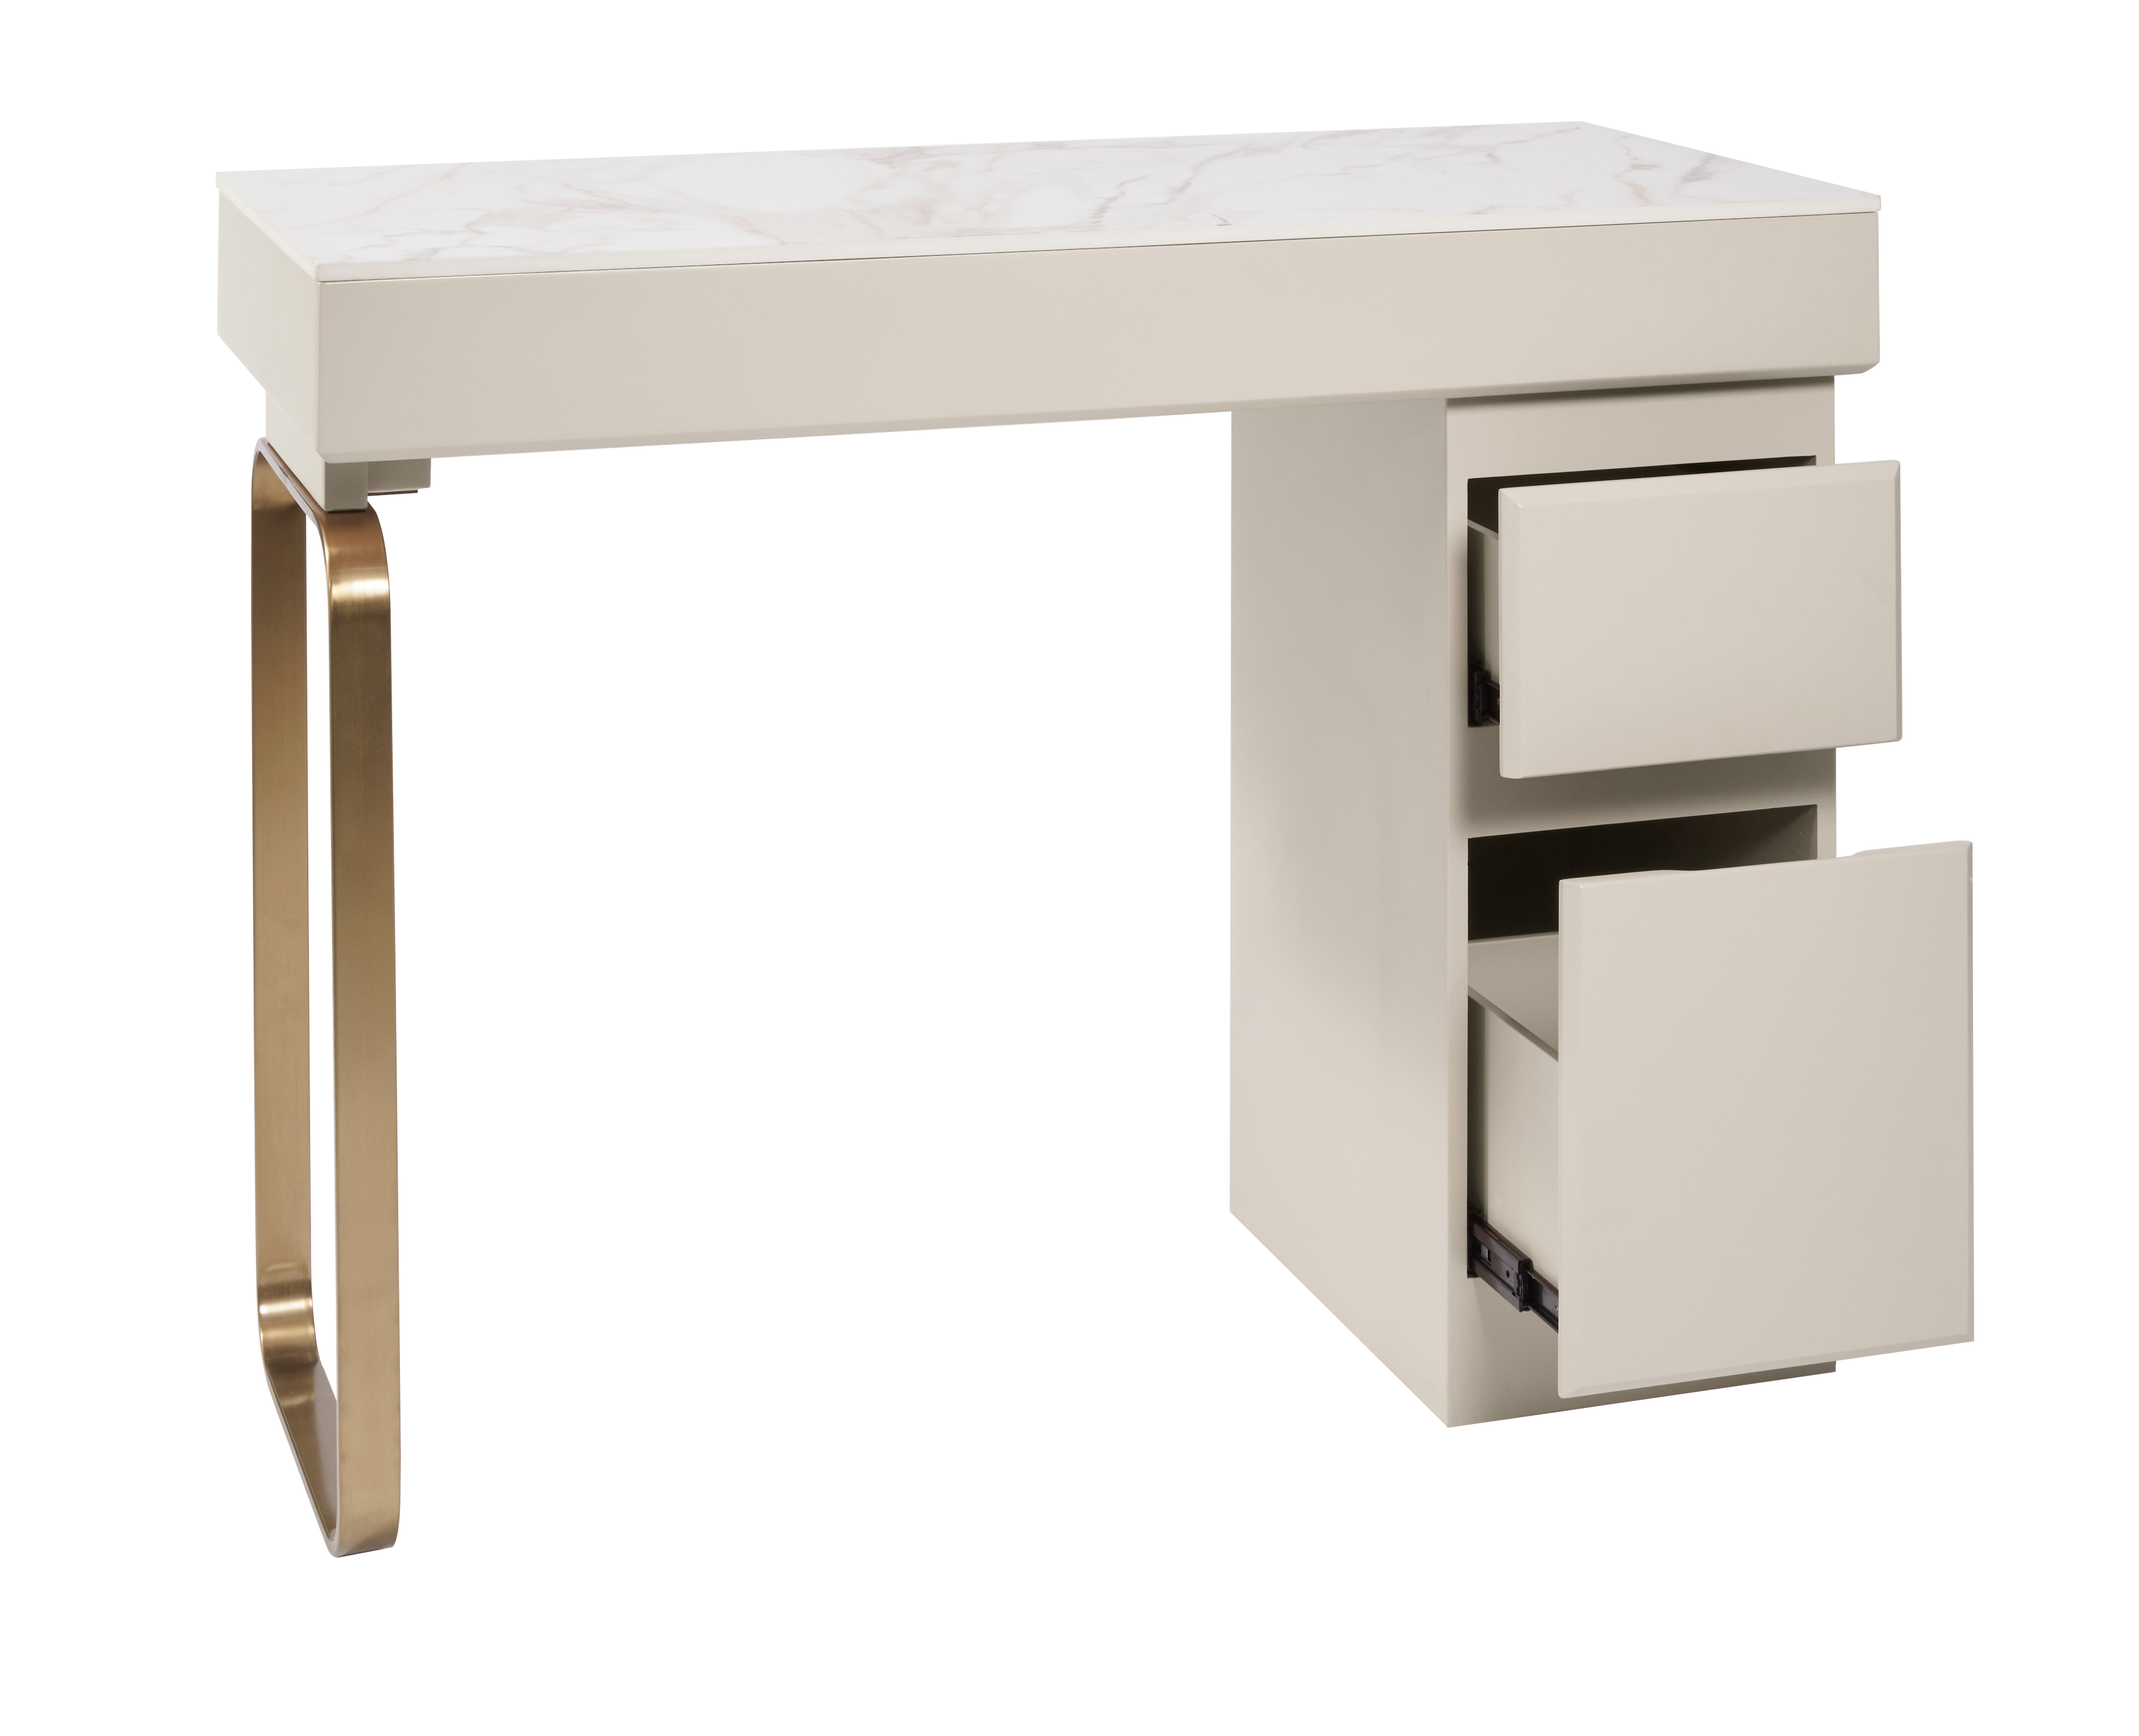 The Maia Nail Desk with White Gold Patterned Stone Top by SEC